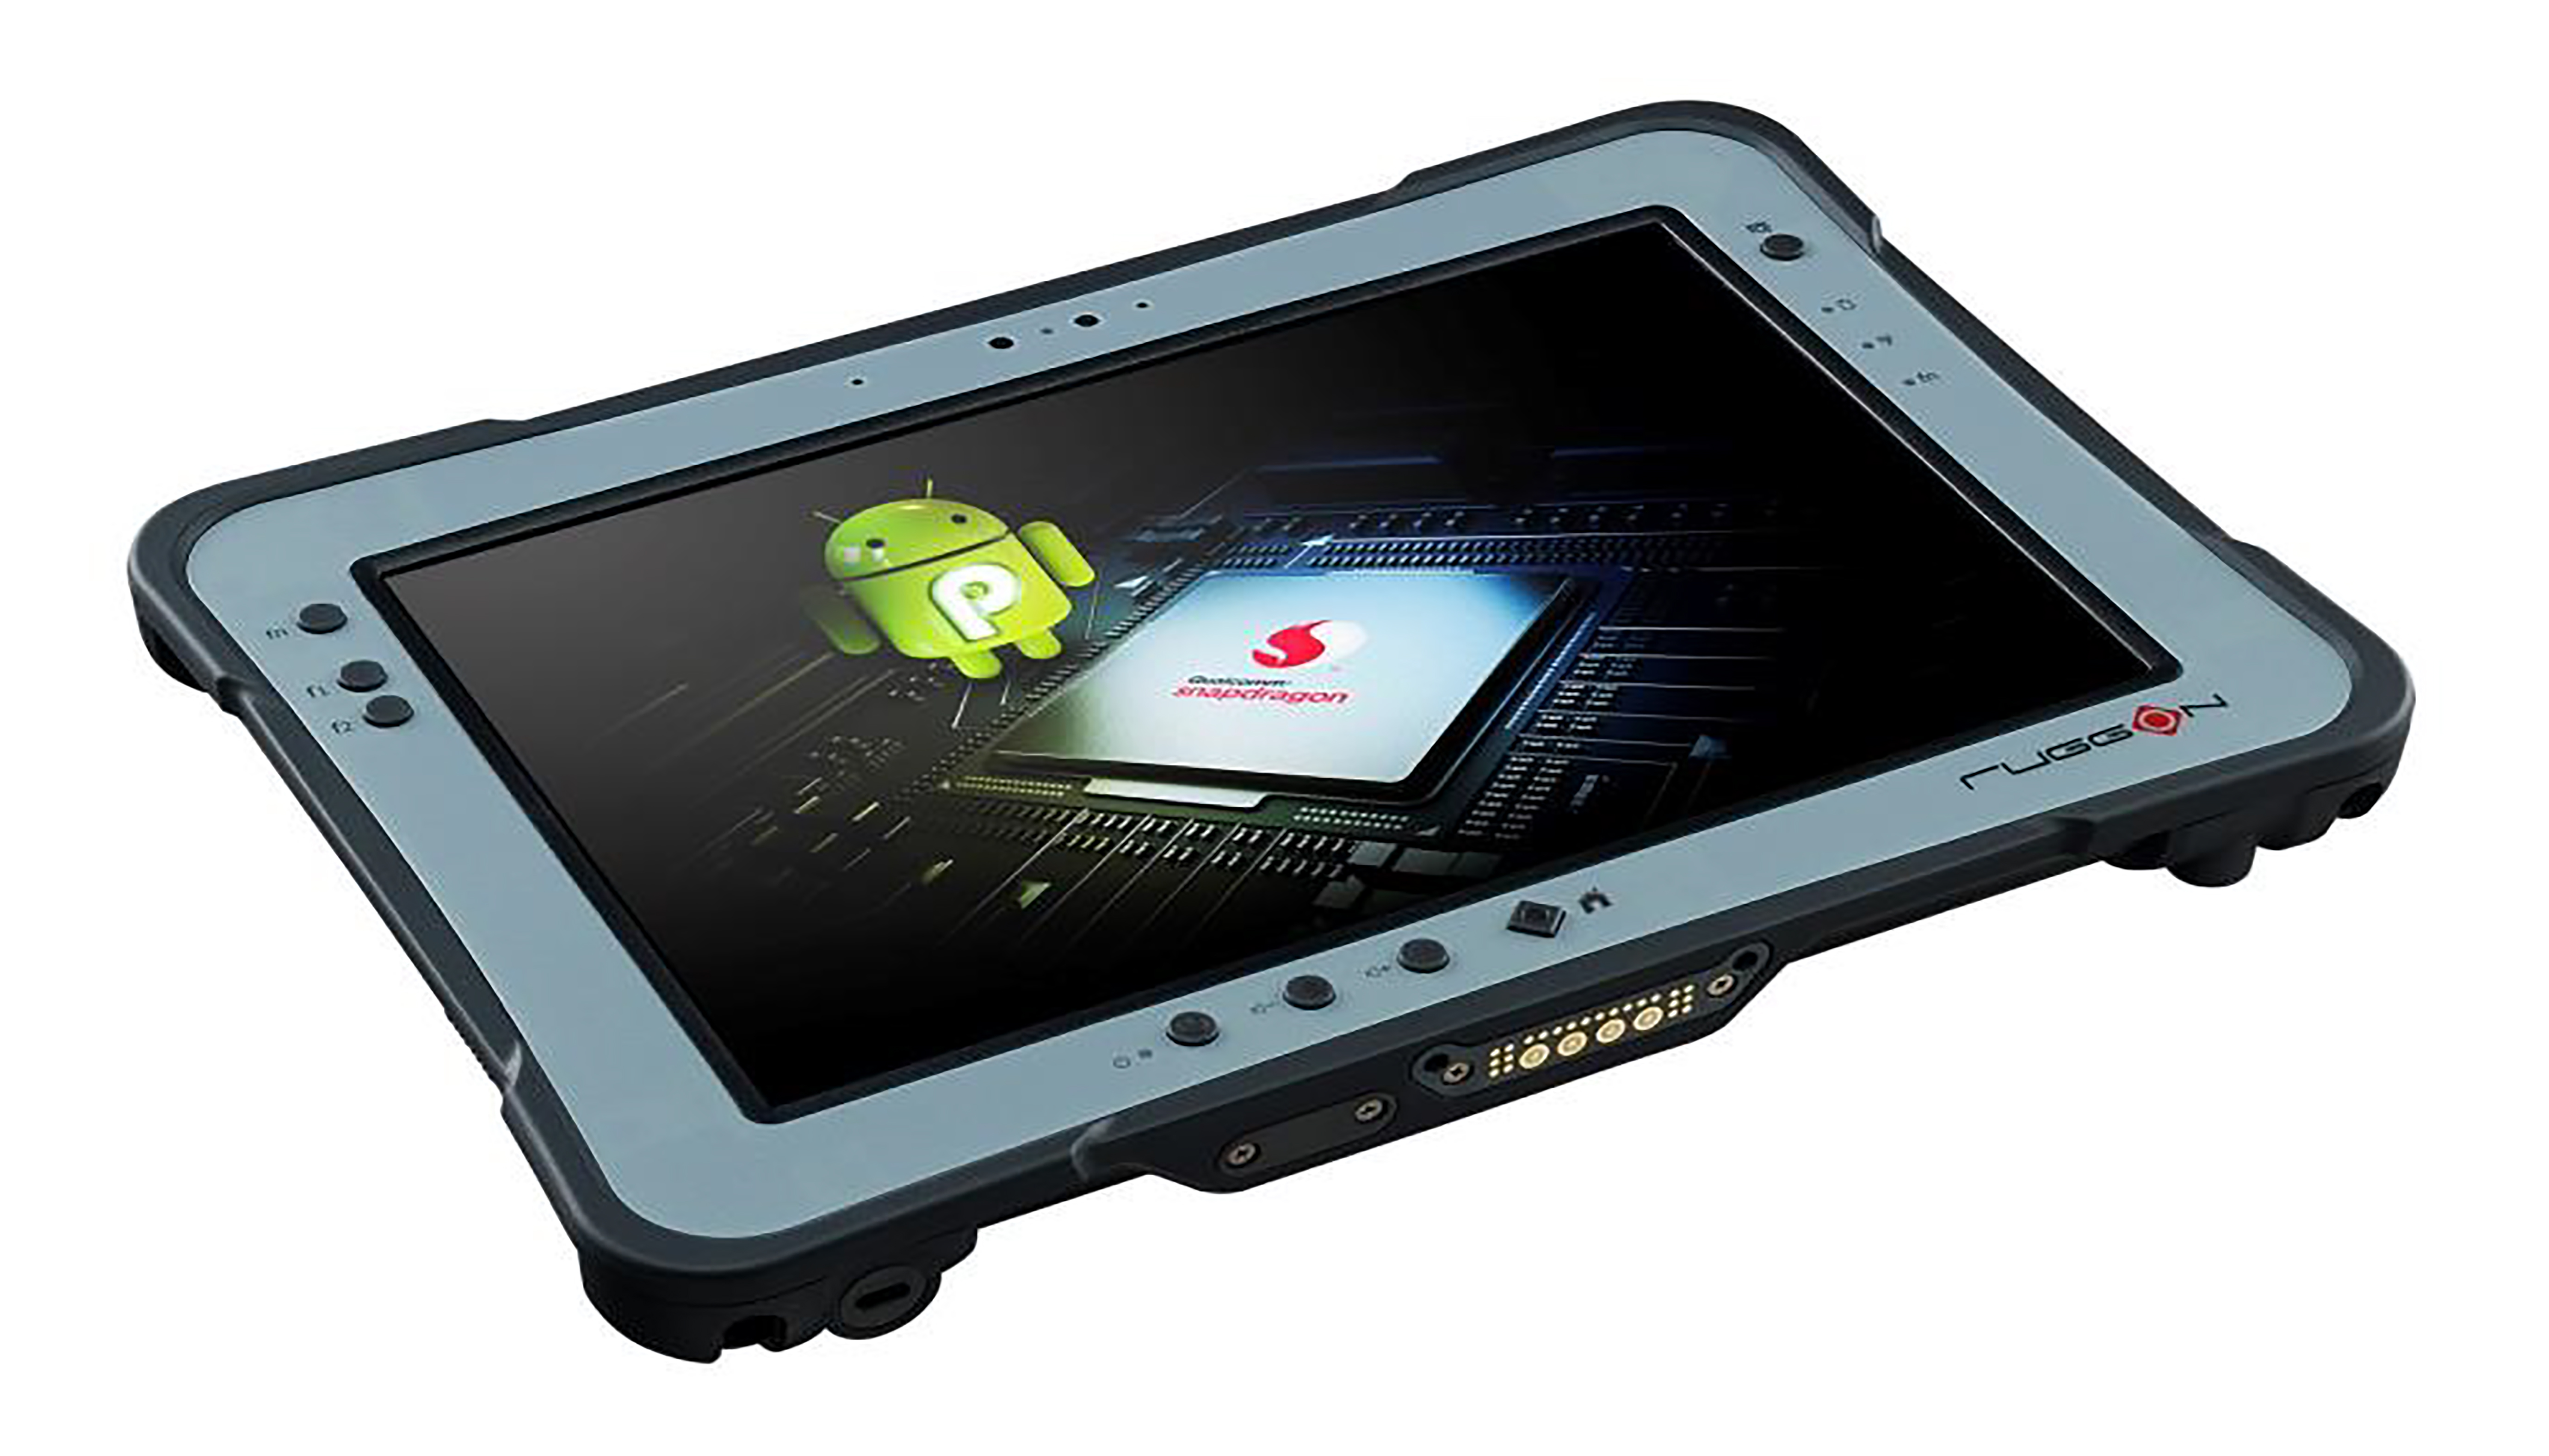 RuggON presents a fully rugged tablet with Android 9 and octa-core processor 